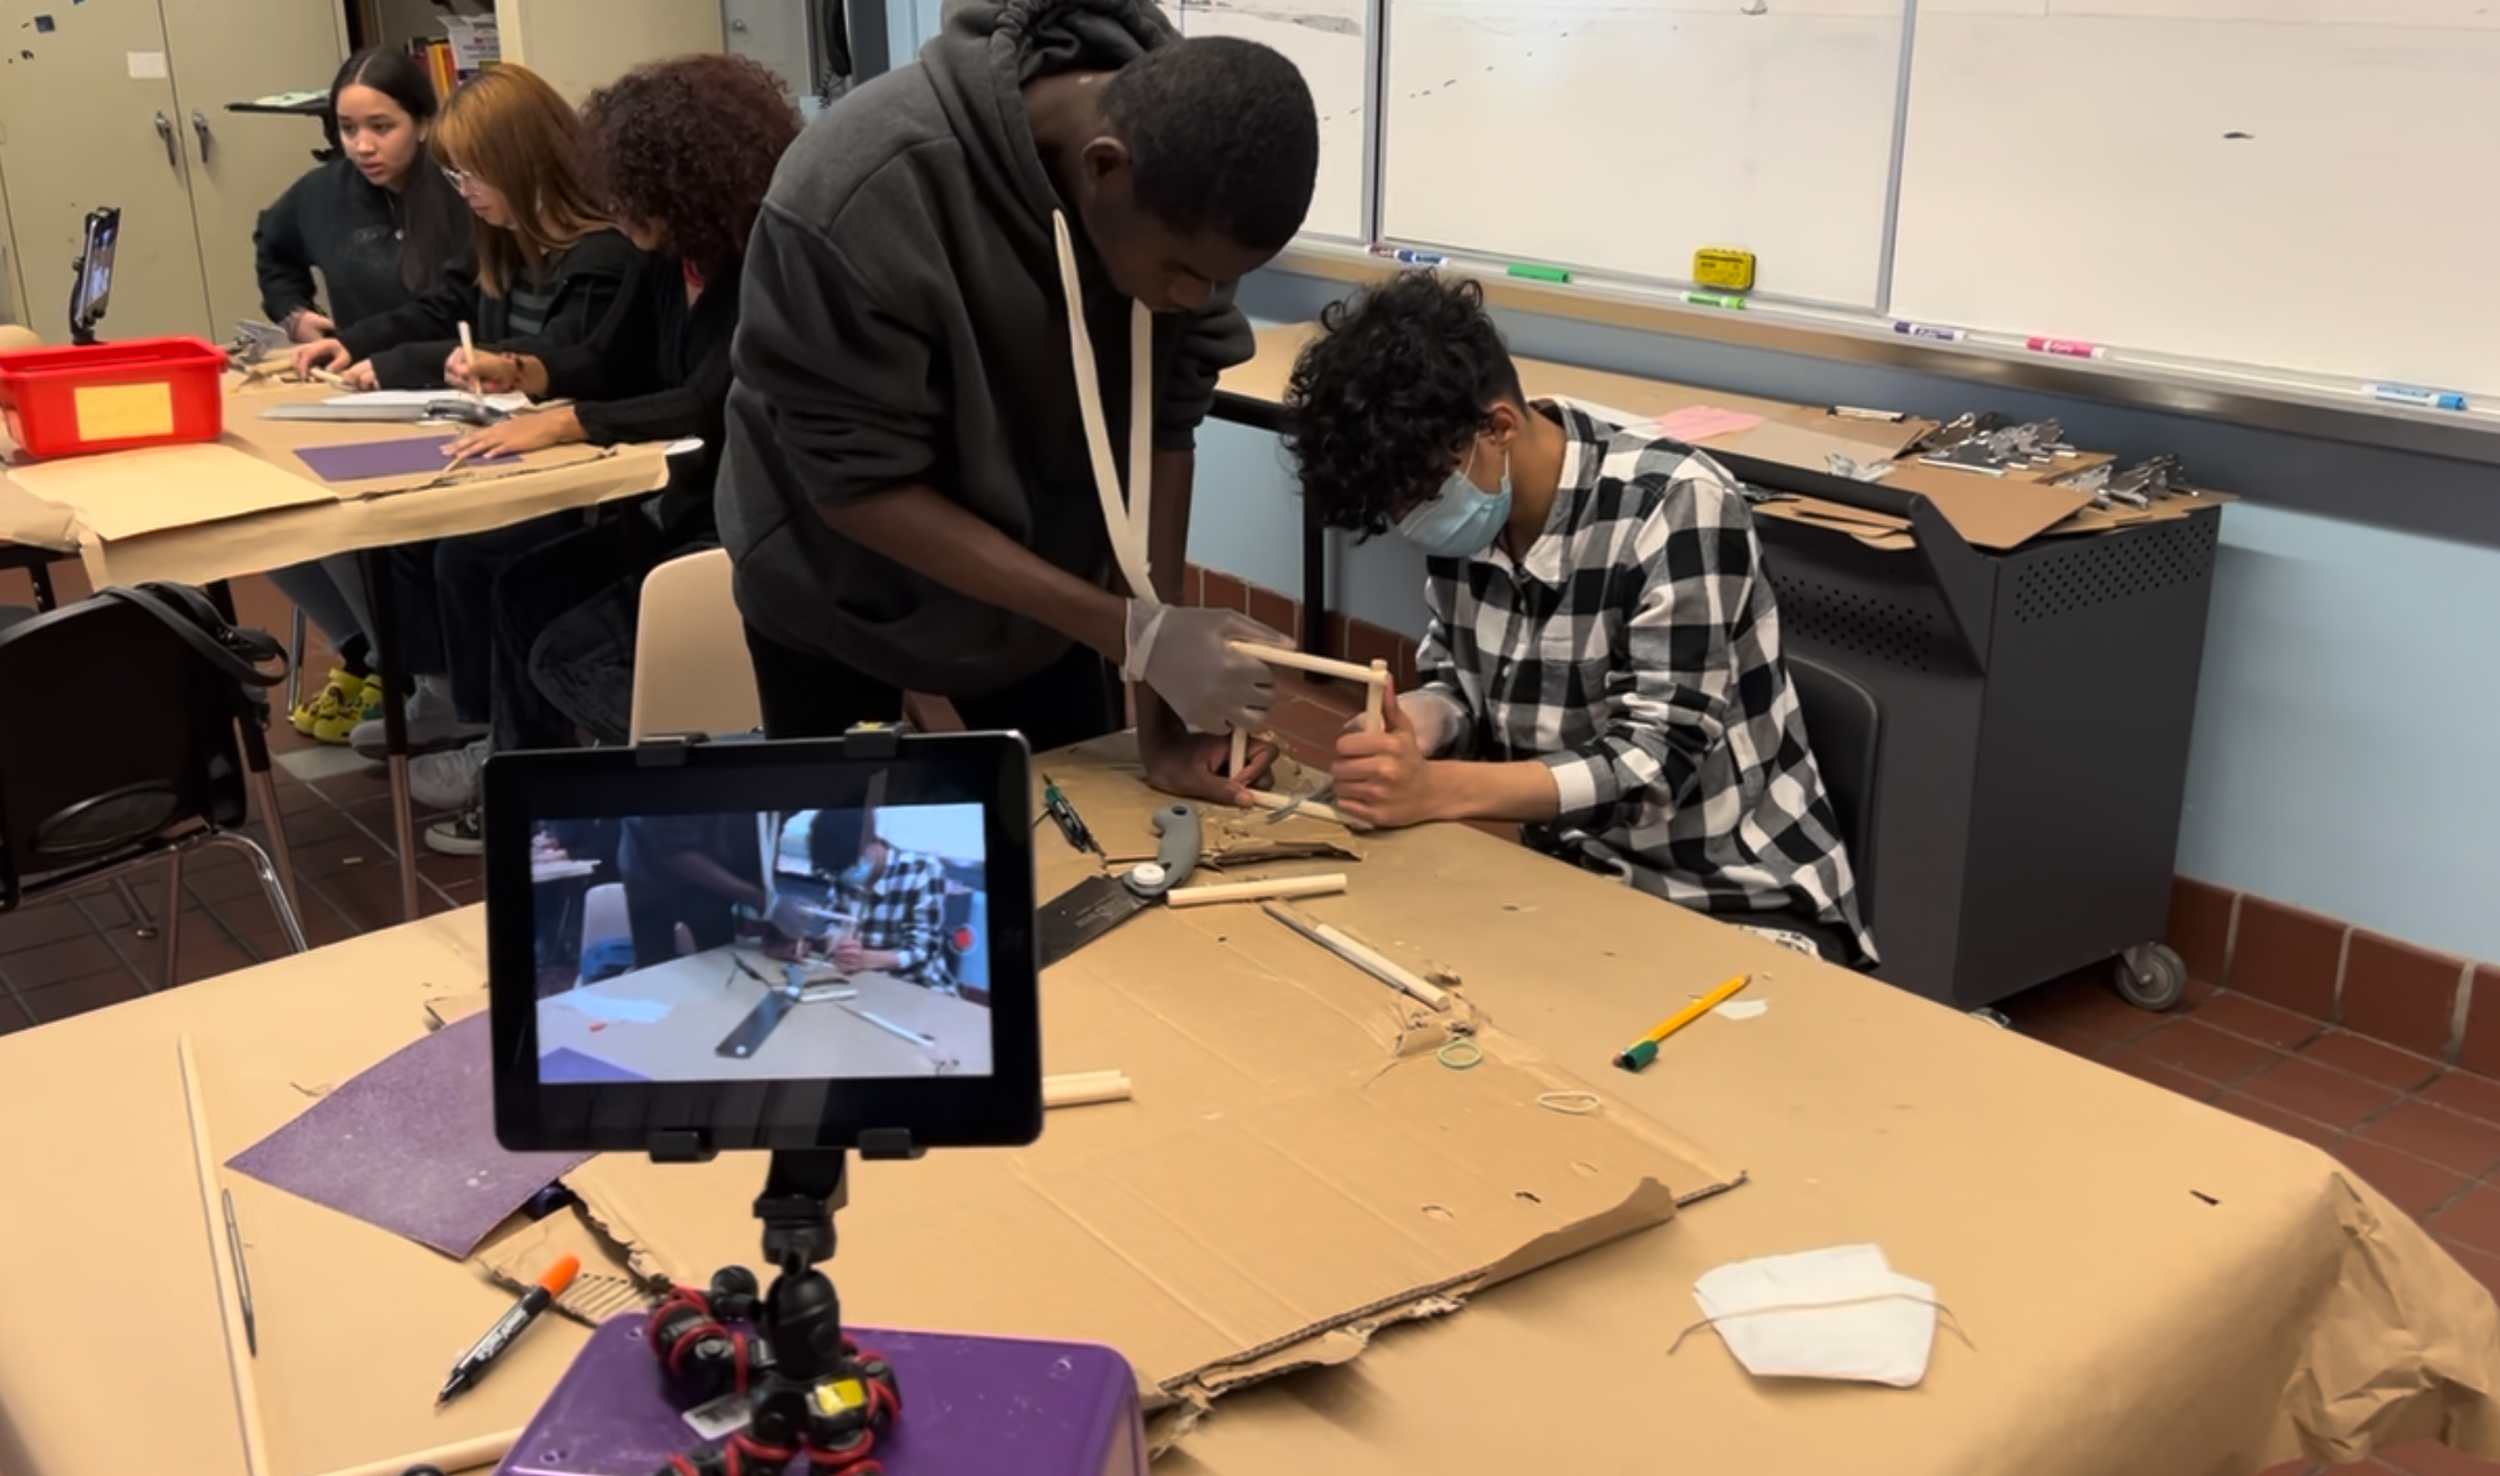 Students Use Time Lapse Setting on an iPad to Document Their Design Process